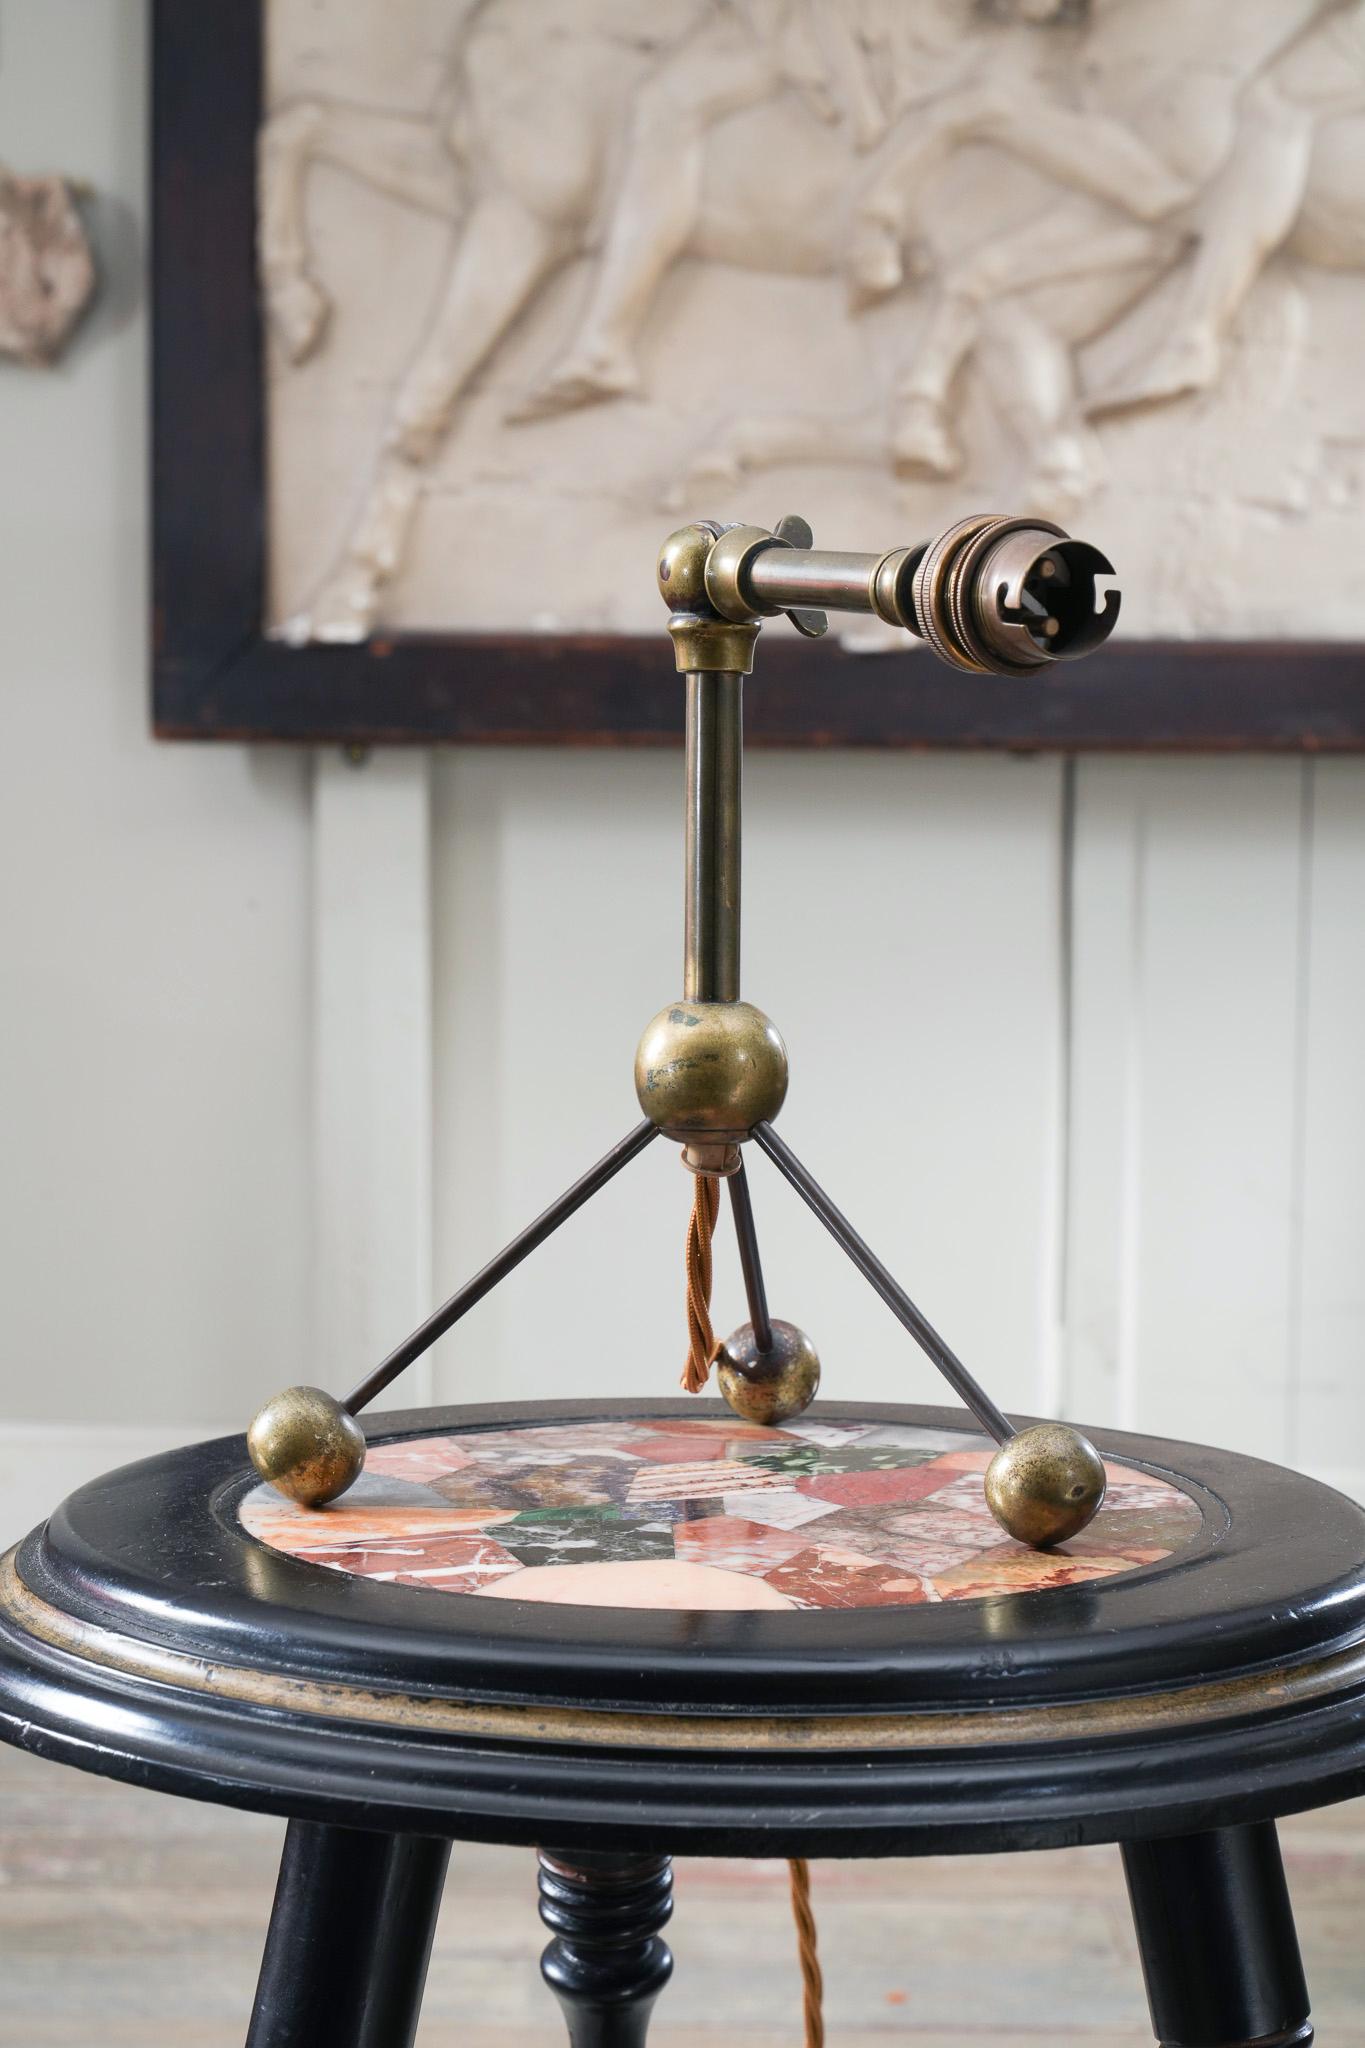 A gilt brass adjustable tripod table light raised on ball feet.

Such an advanced design for the period.